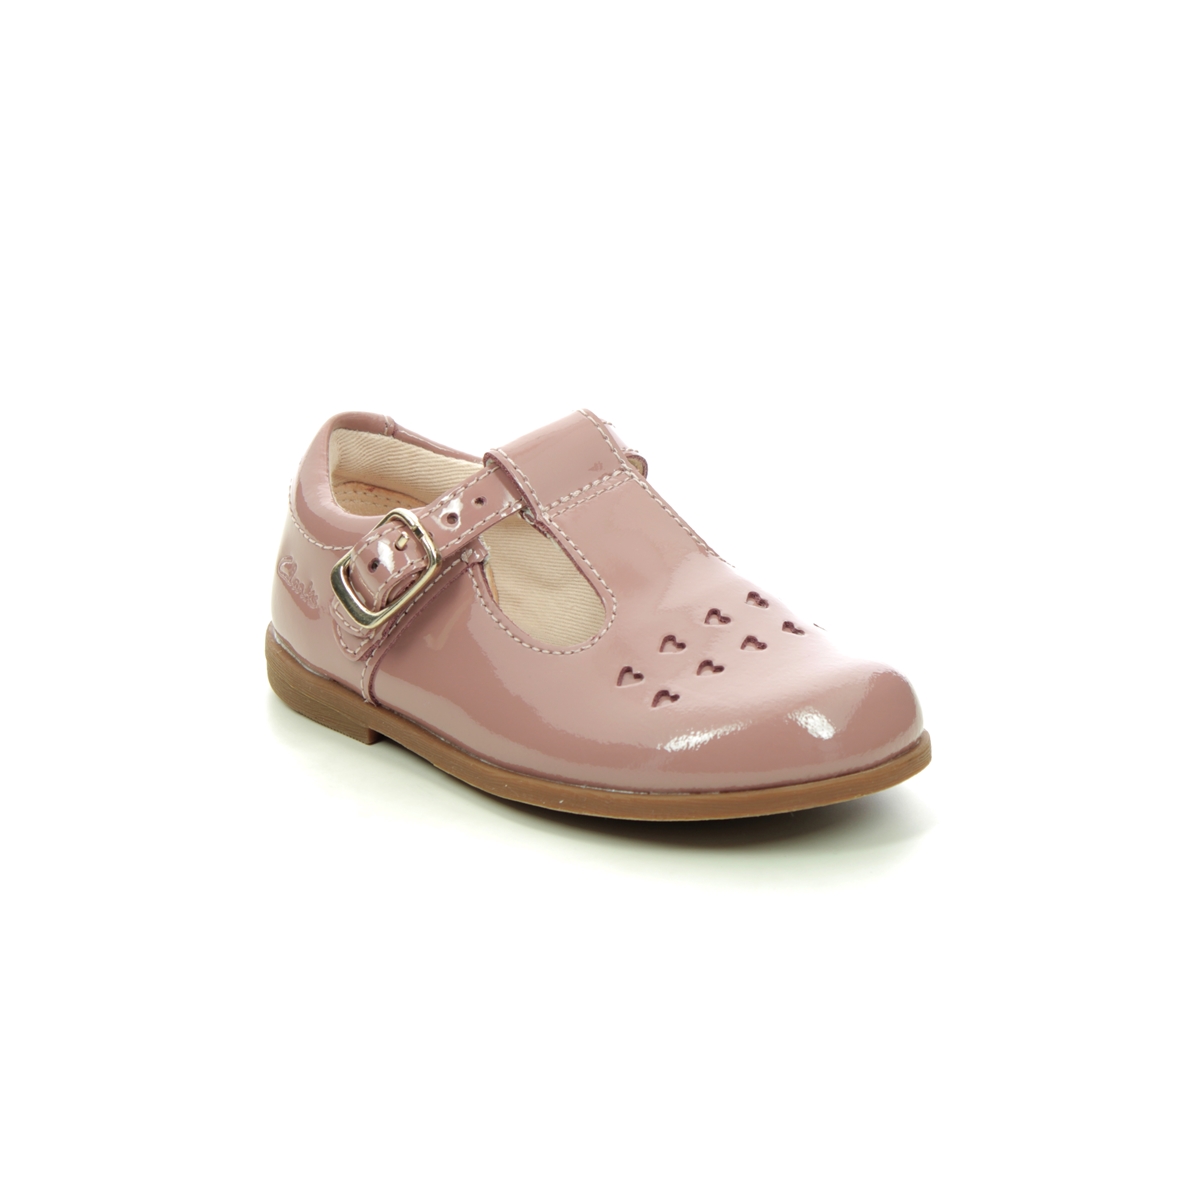 Clarks Drew Play T Pink Kids First And Toddler 651976F In Size 6.5 In Plain Pink F Width Fitting Regular Fit For kids